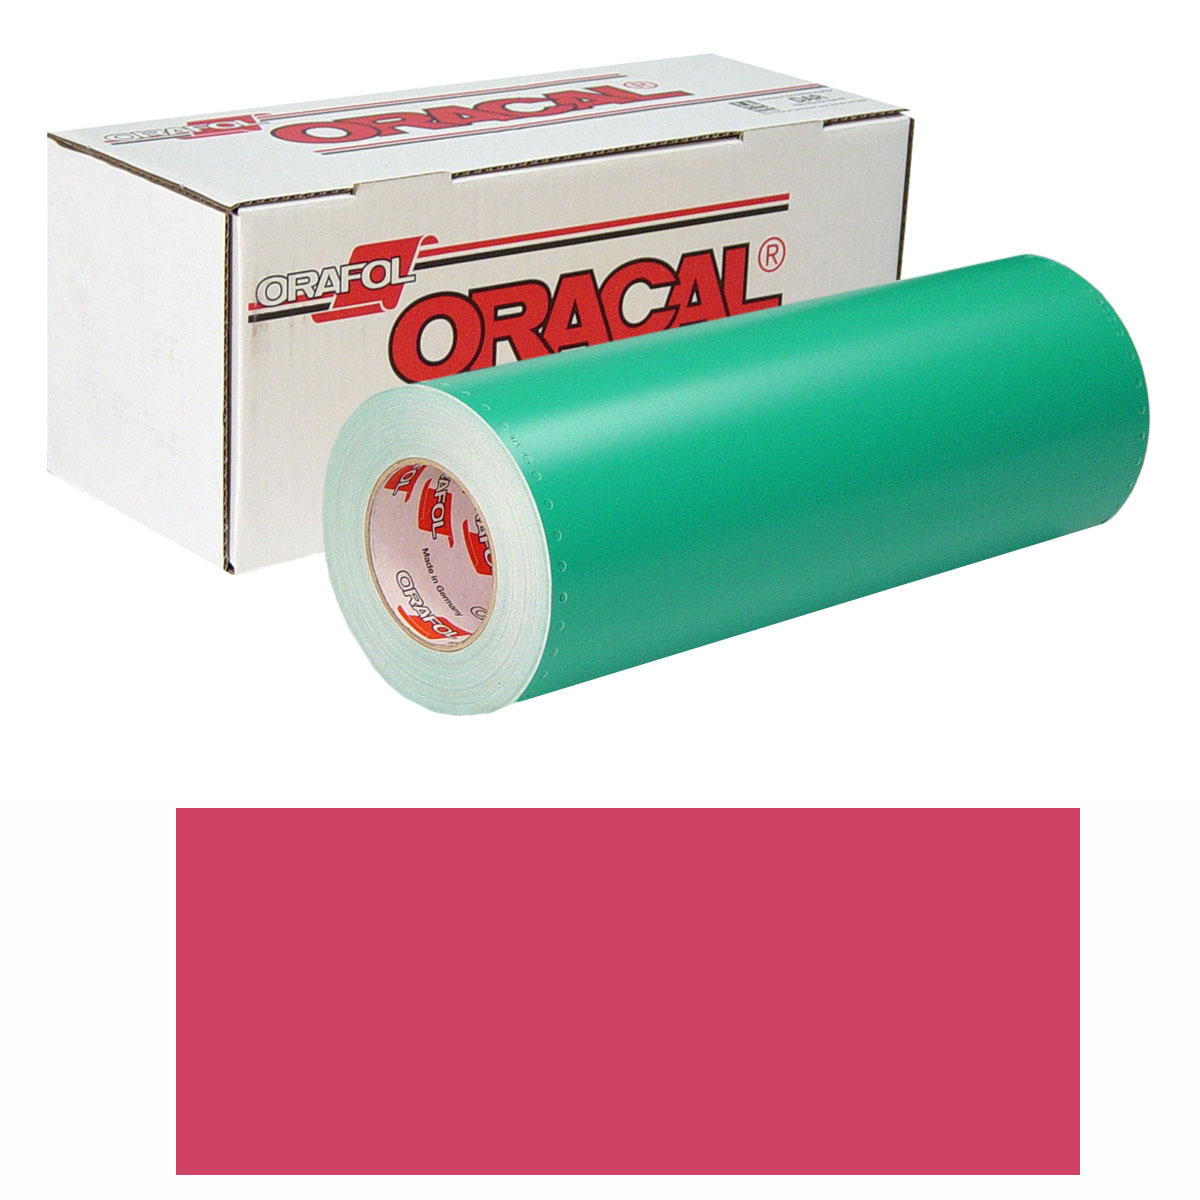 ORACAL 8500 30in X 50yd 017 Cherry Red